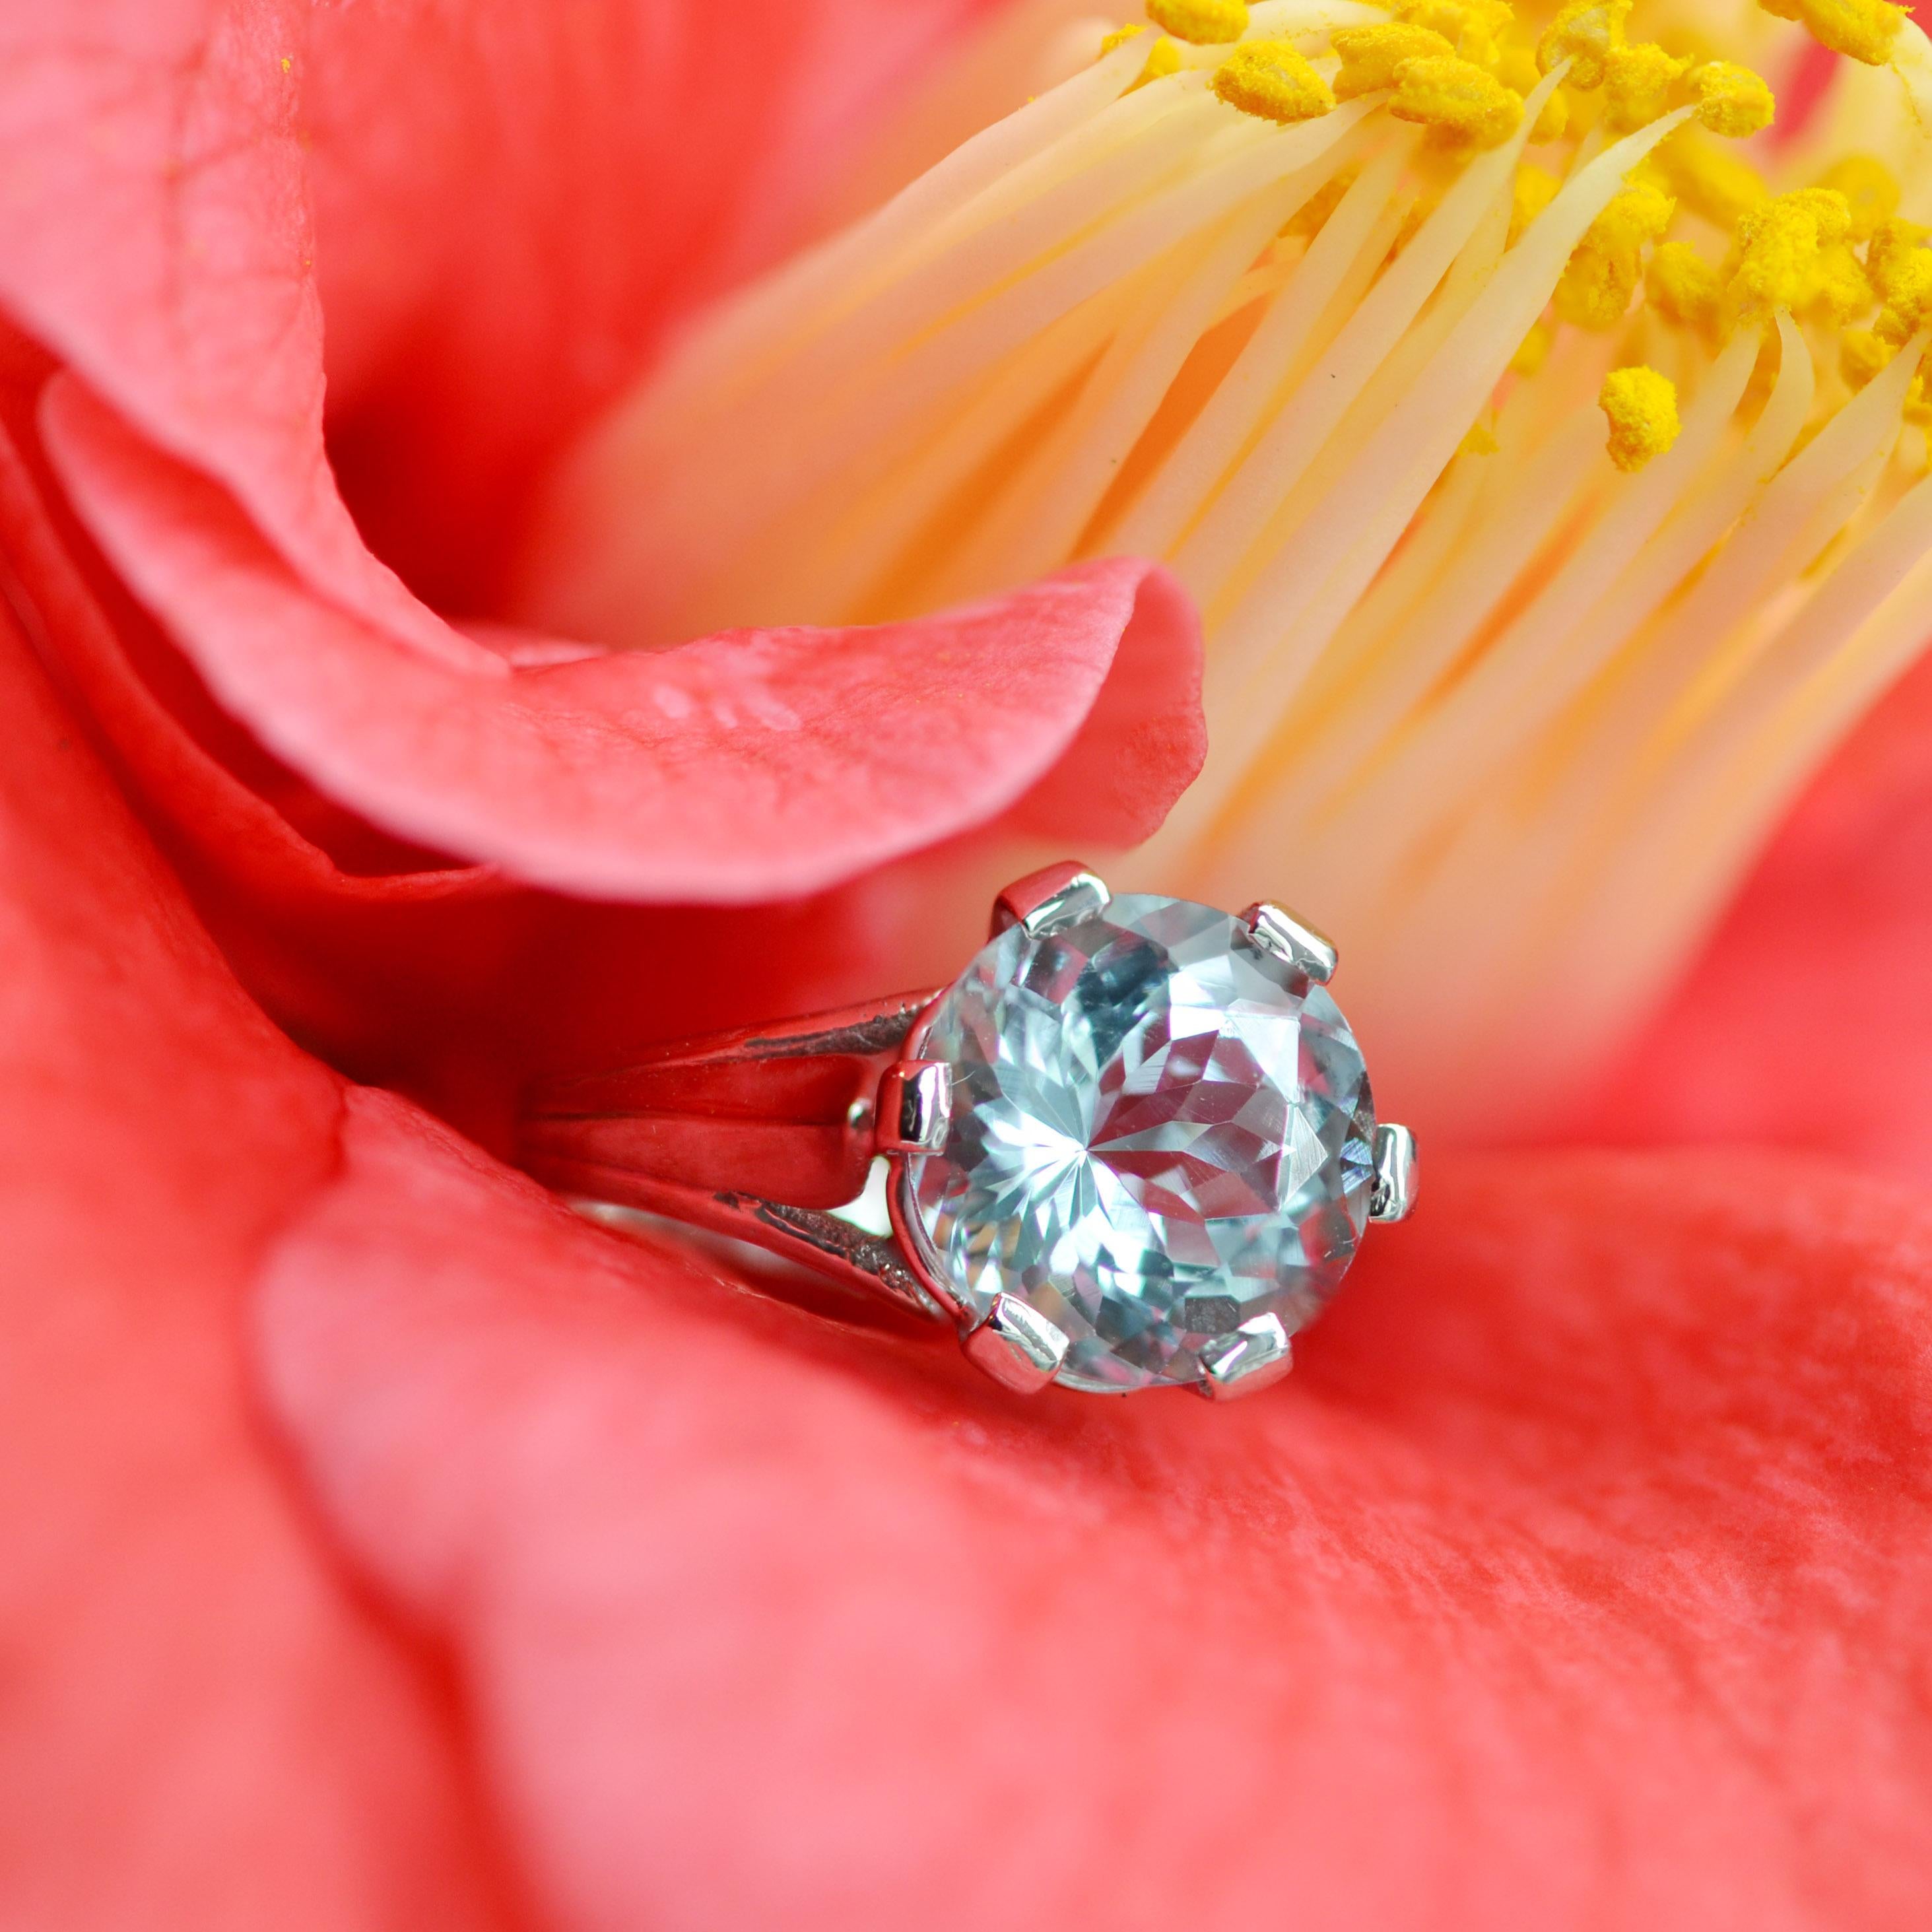 Retro French 1950s 3.25 Carats Aquamarine 18 Karat White Gold Solitaire Ring For Sale